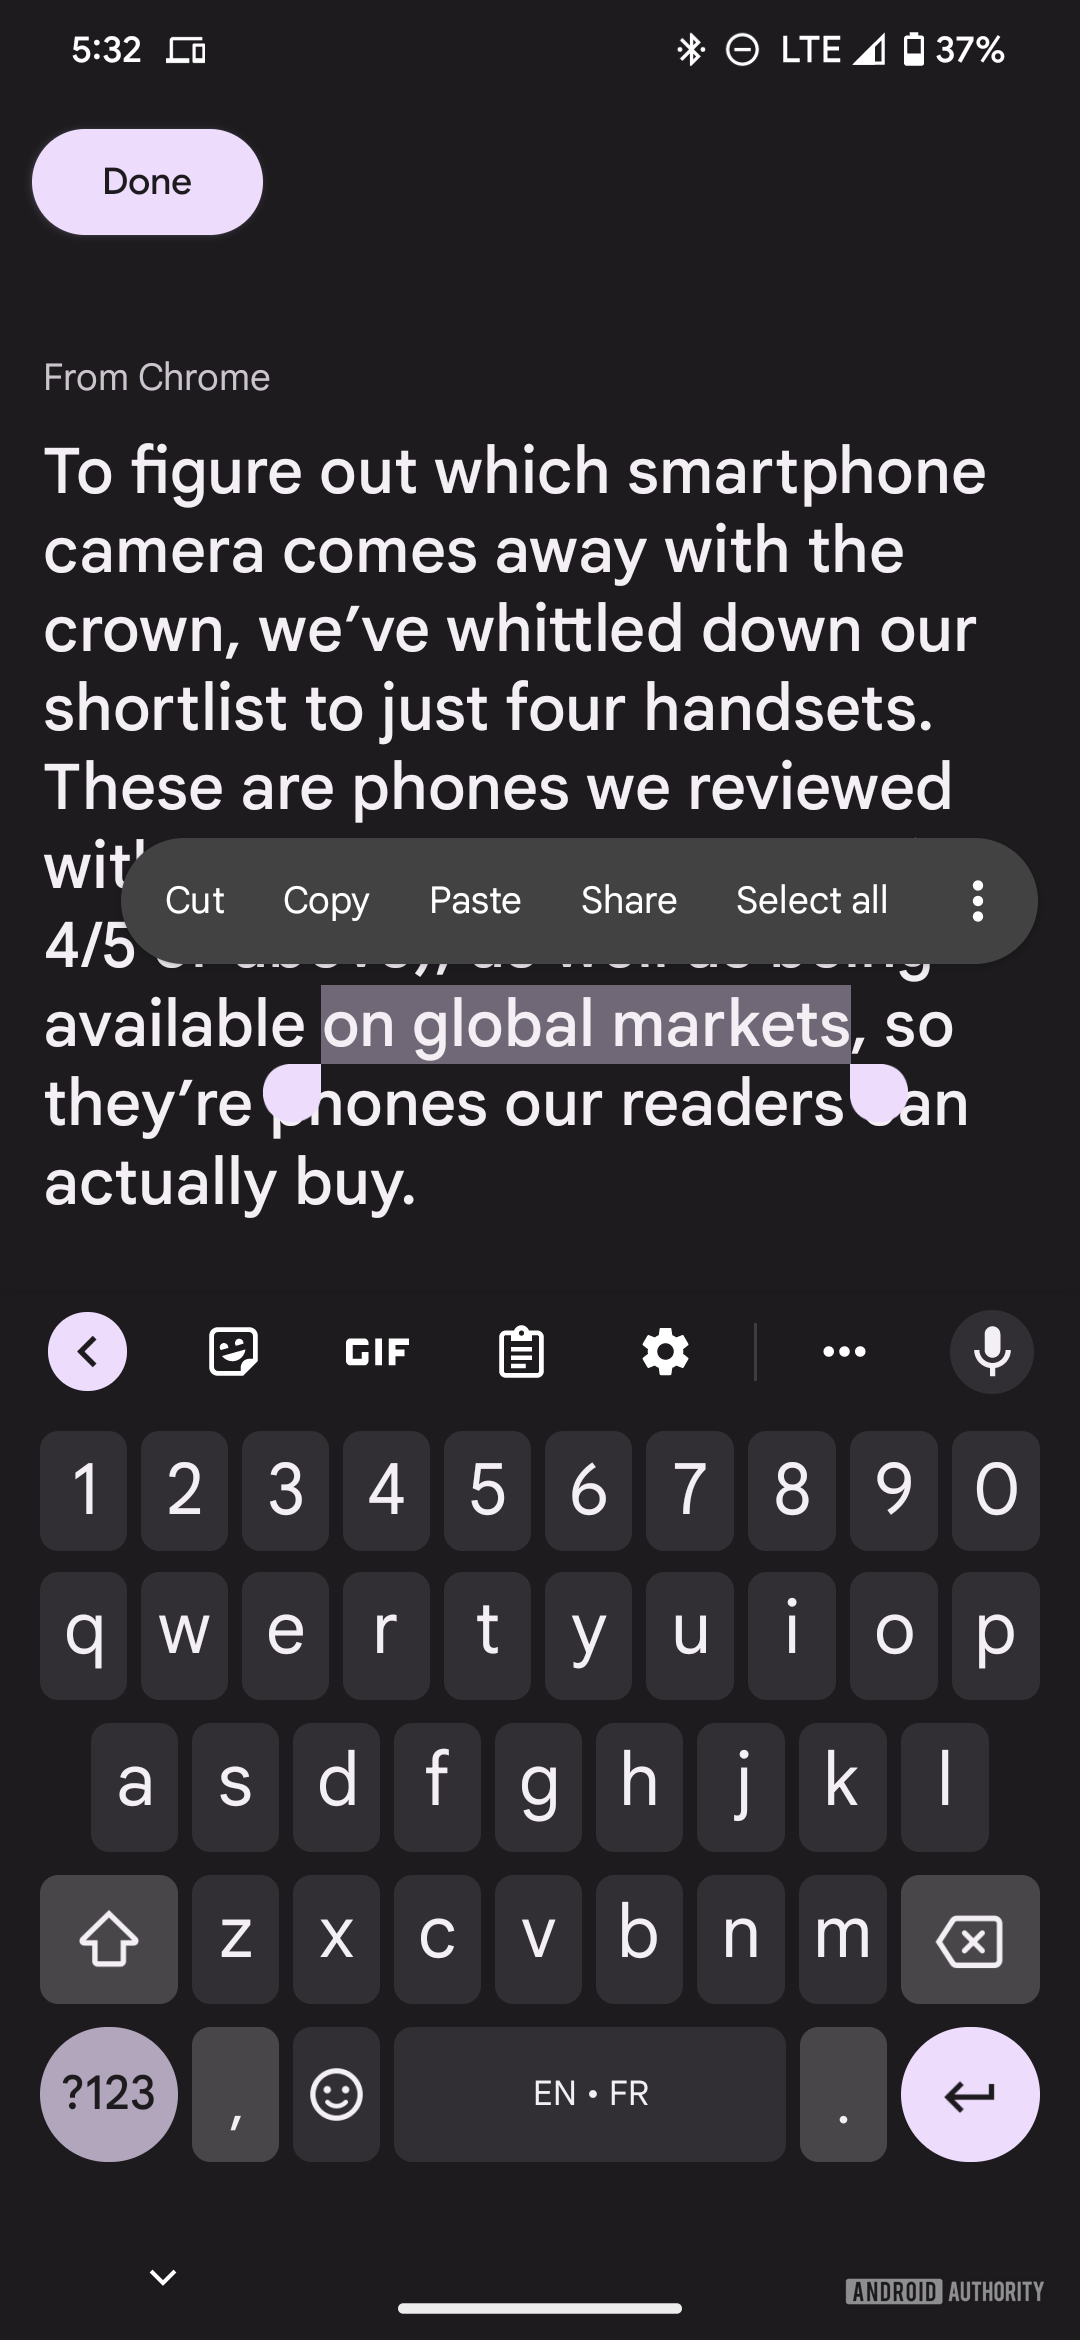 A screenshot of the Android 13 clipboard editor showing some text being edited.